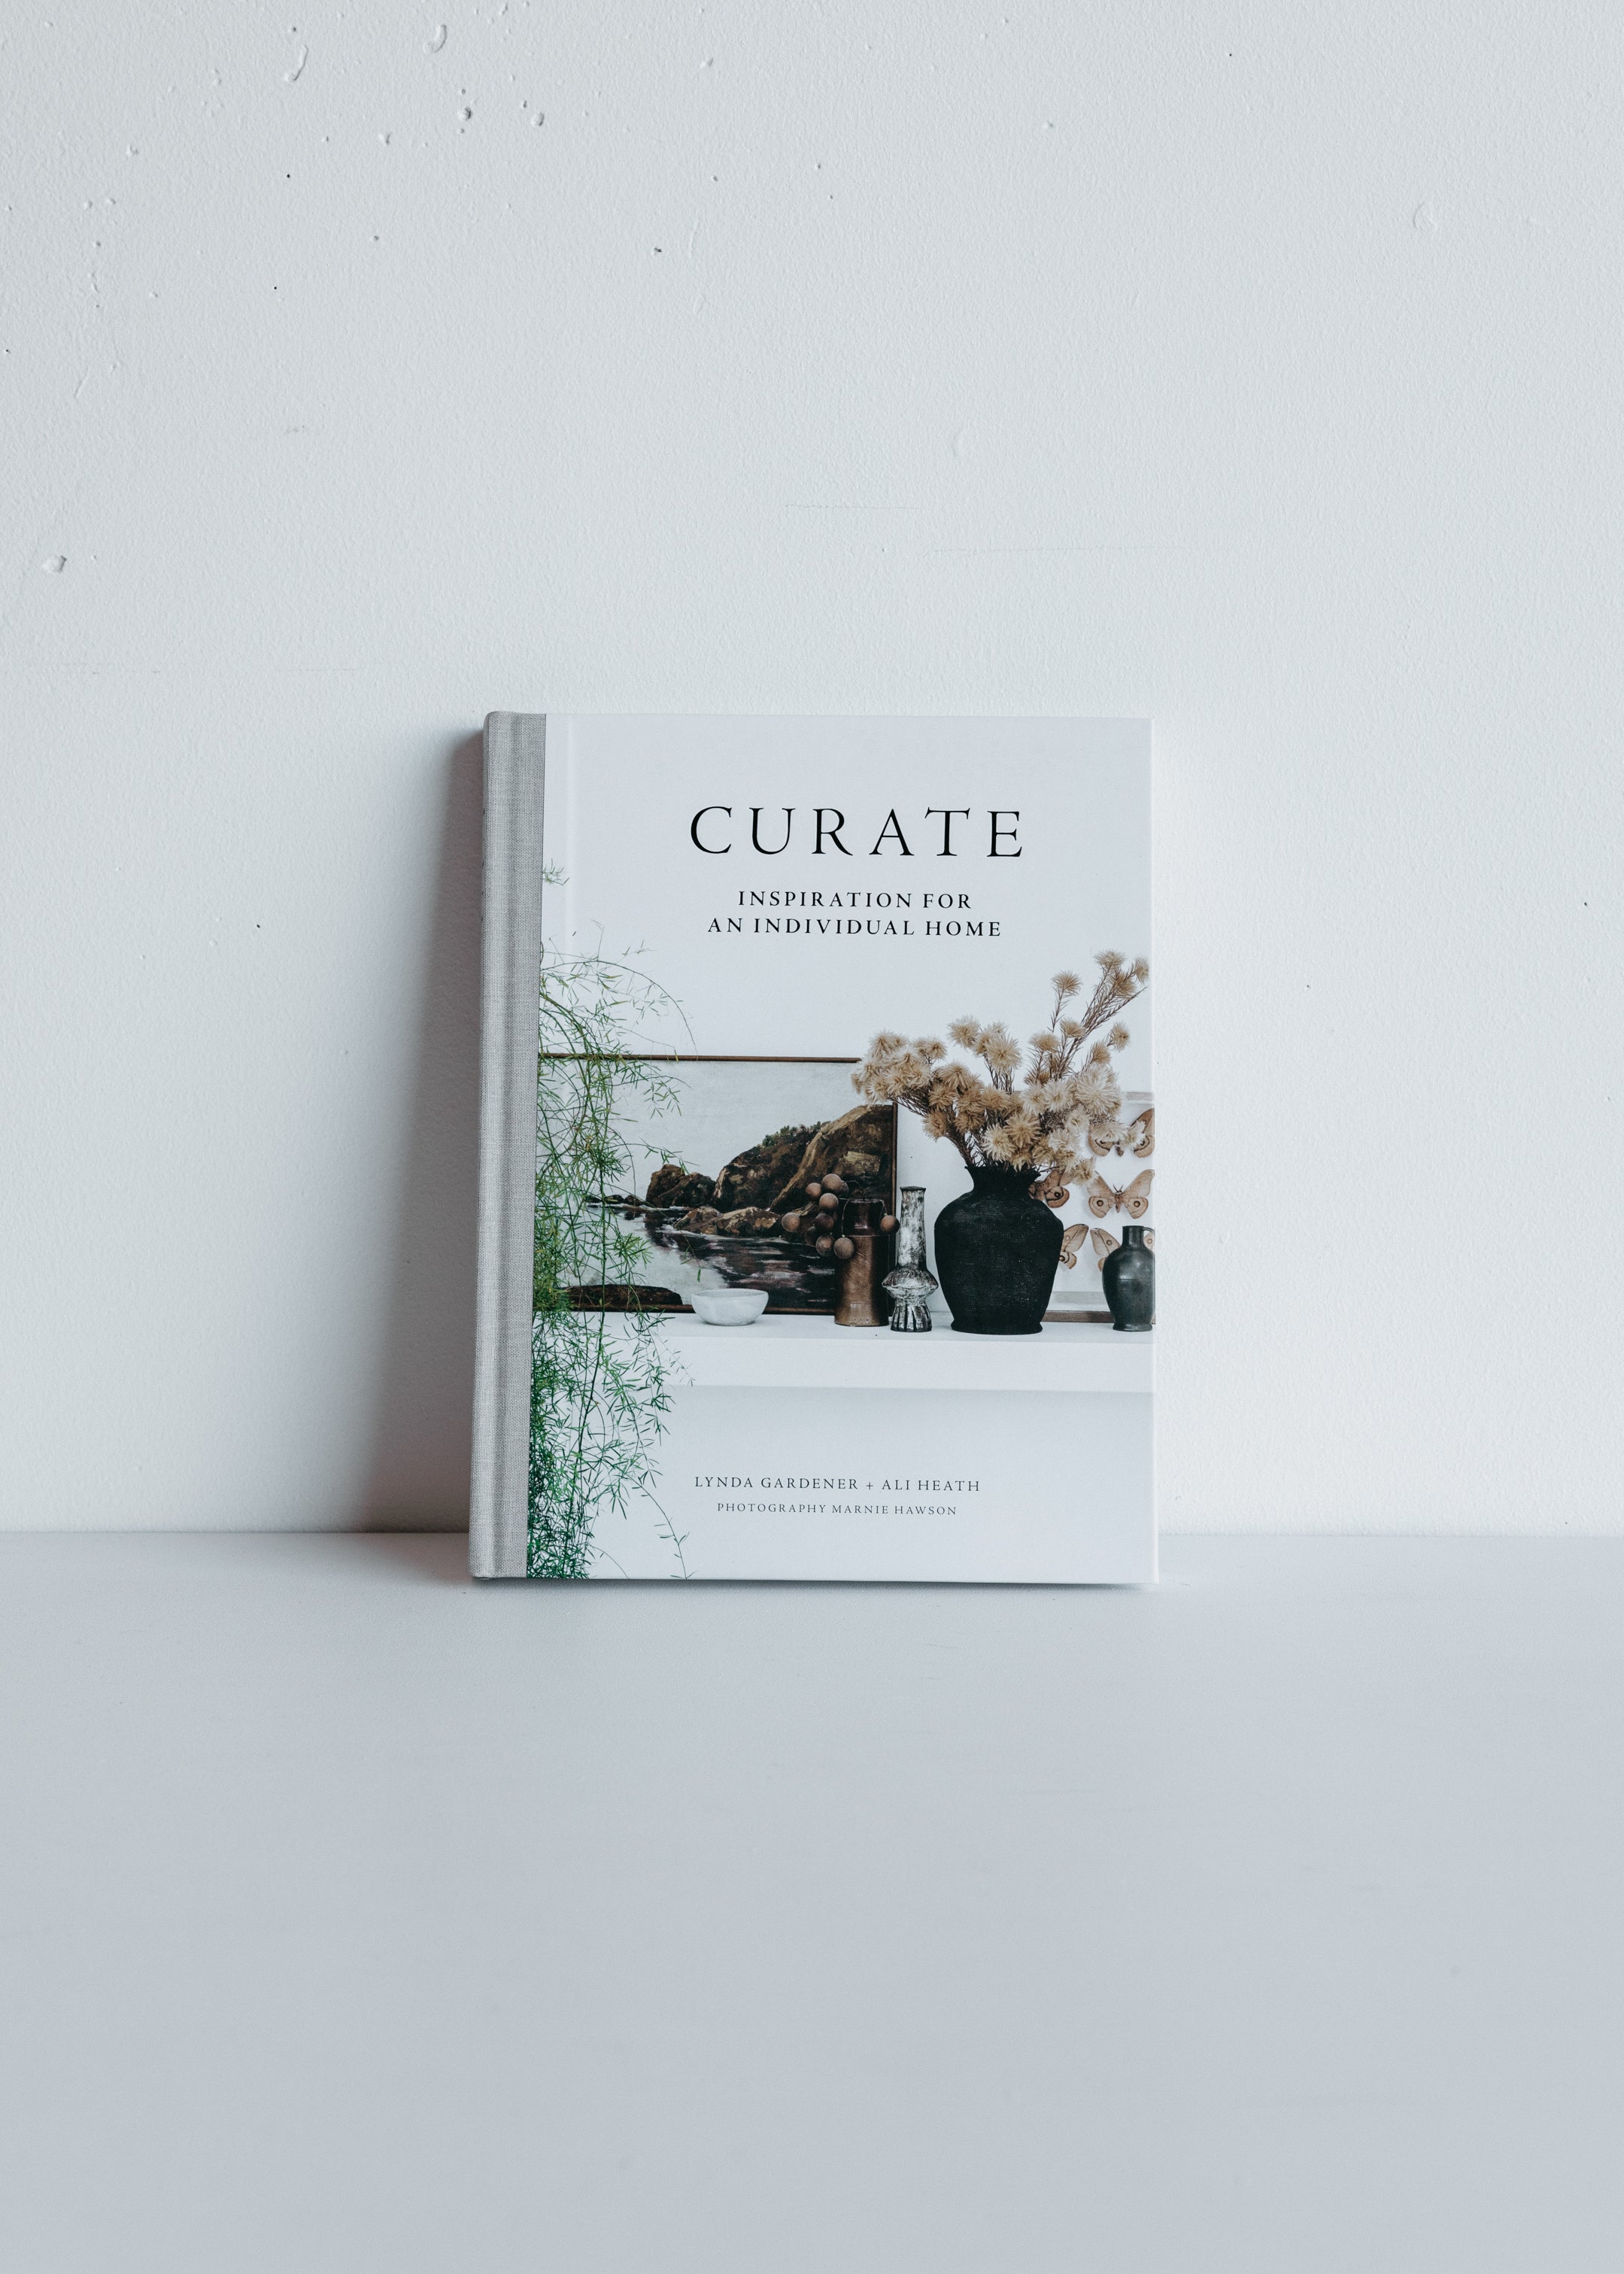 Curate / Inspiration for an Individual Home